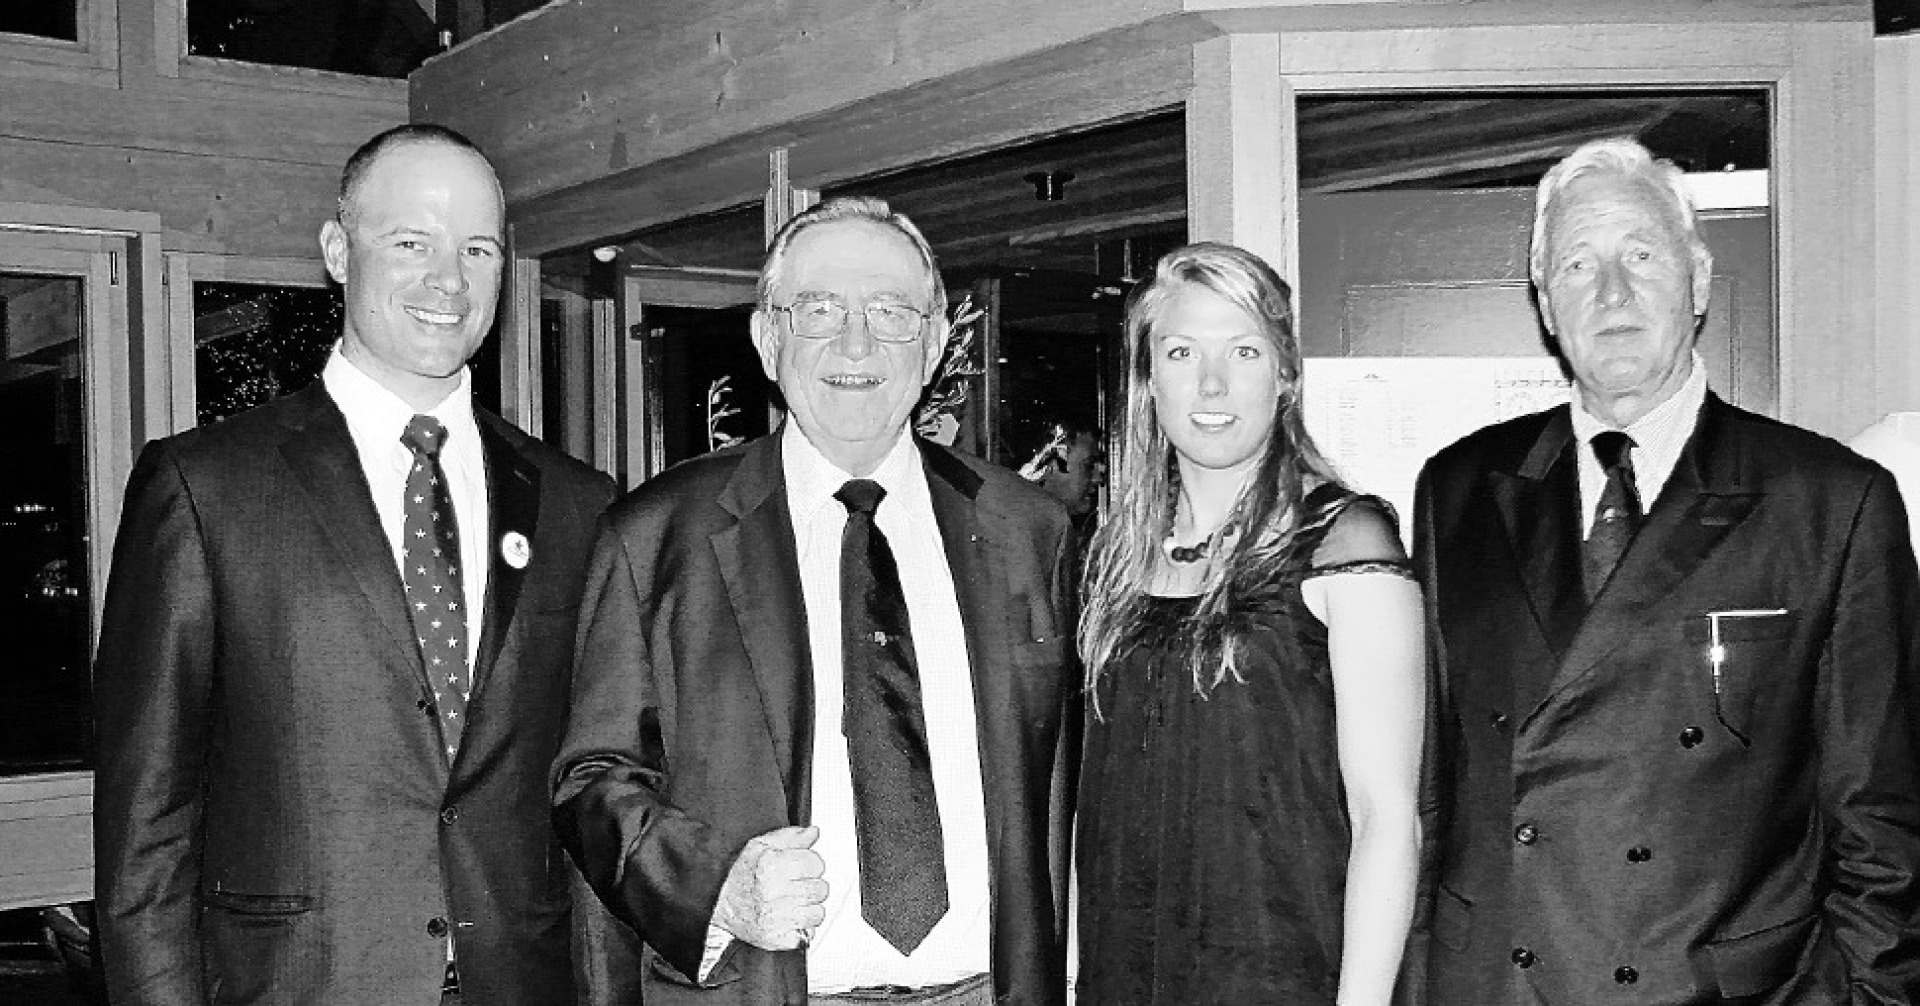 In the image you see him with GYC-Member Flavio Marazzi and Nathalie Brugger, 2010 when the GYC hosted a dinner in the honour of the 50th anniversary of His both three-time Olympic participants, and Honorary president Peter Erzberger Majesty’s Olympic Gold medal in 1960.